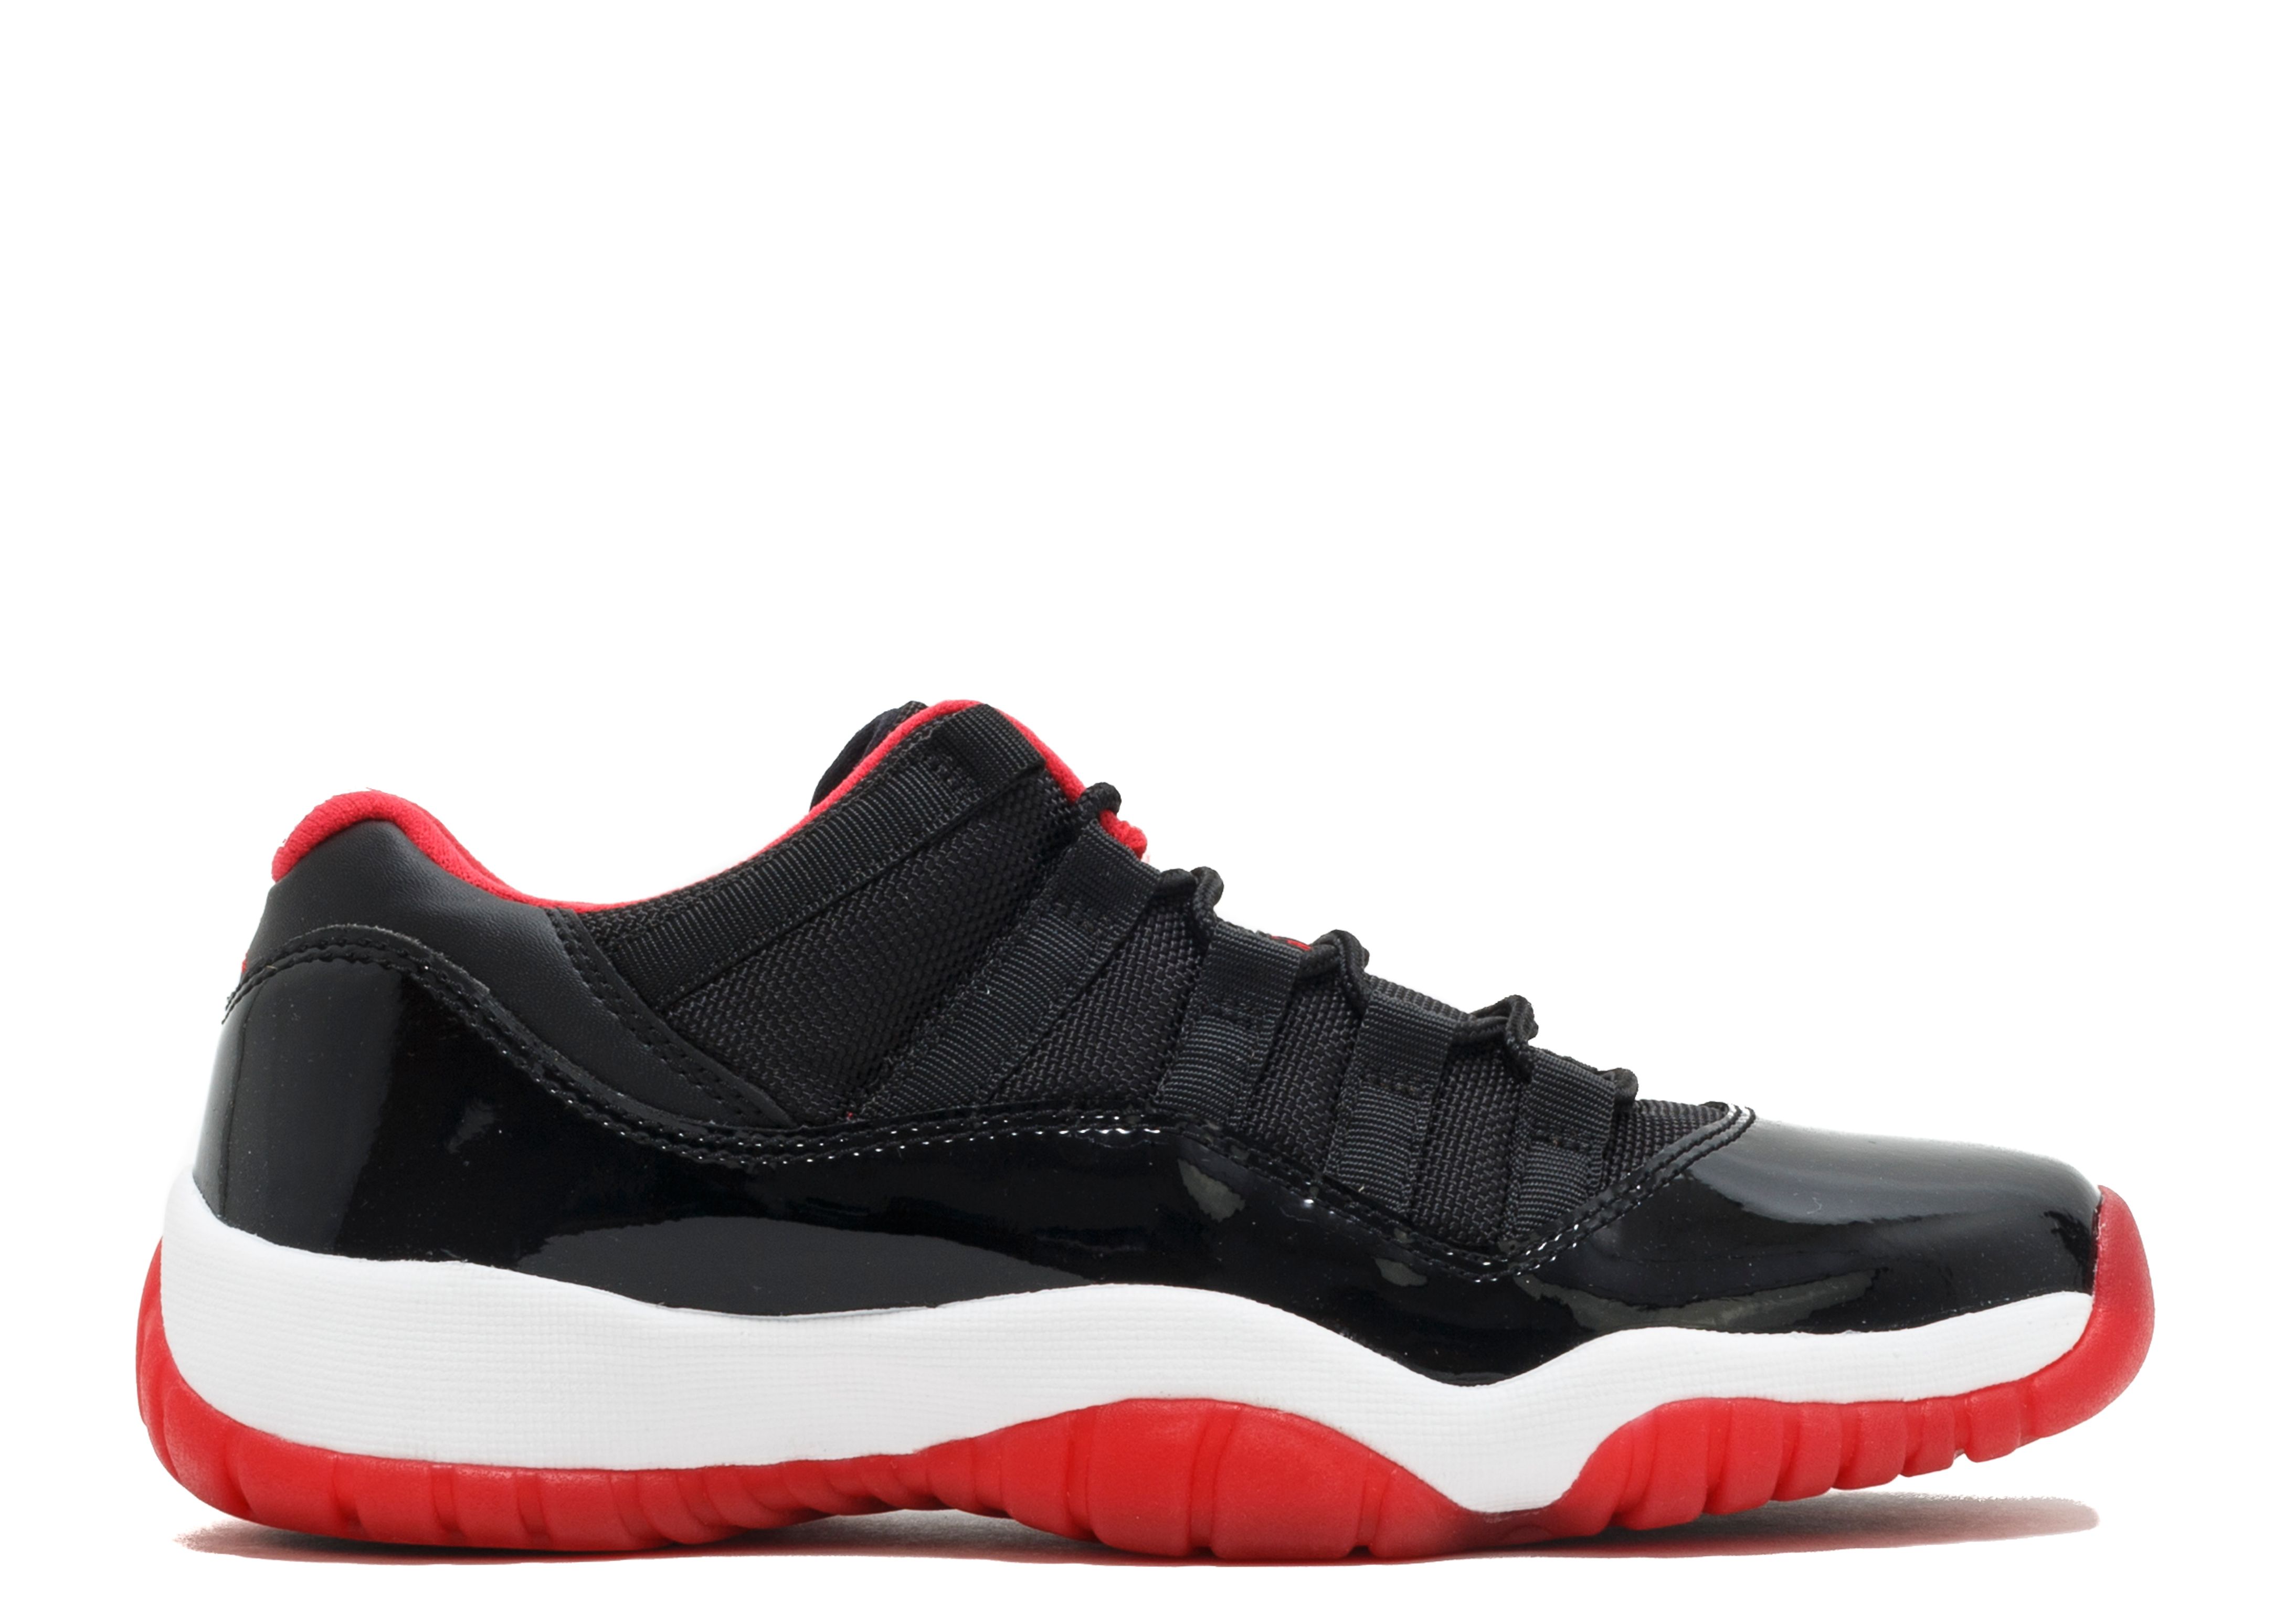 black and red 11s low